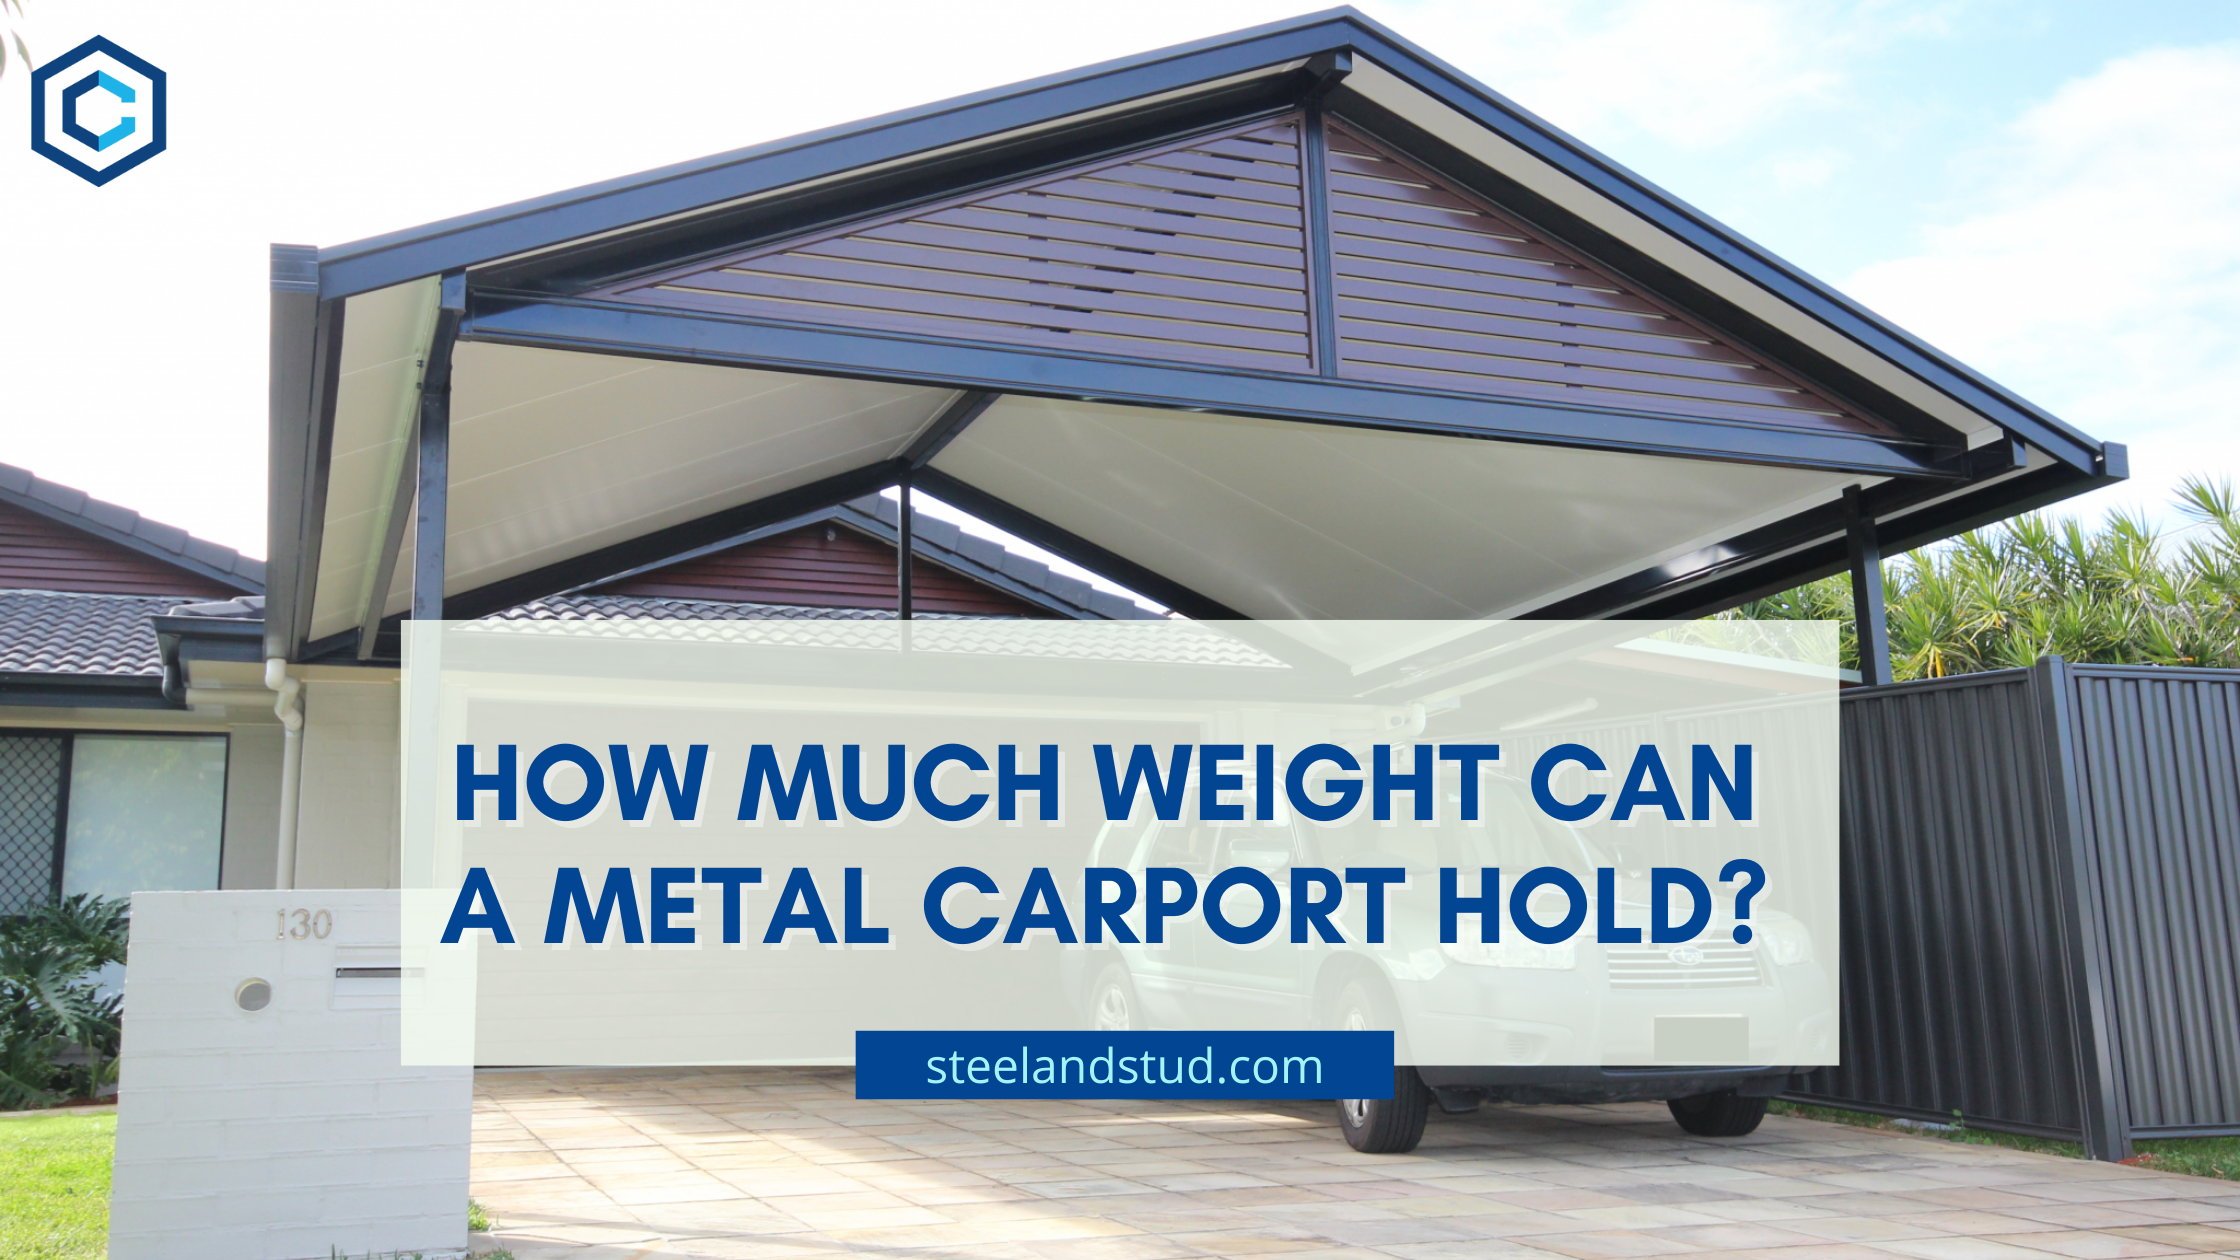 How Much Weight Can A Metal Carport Hold?